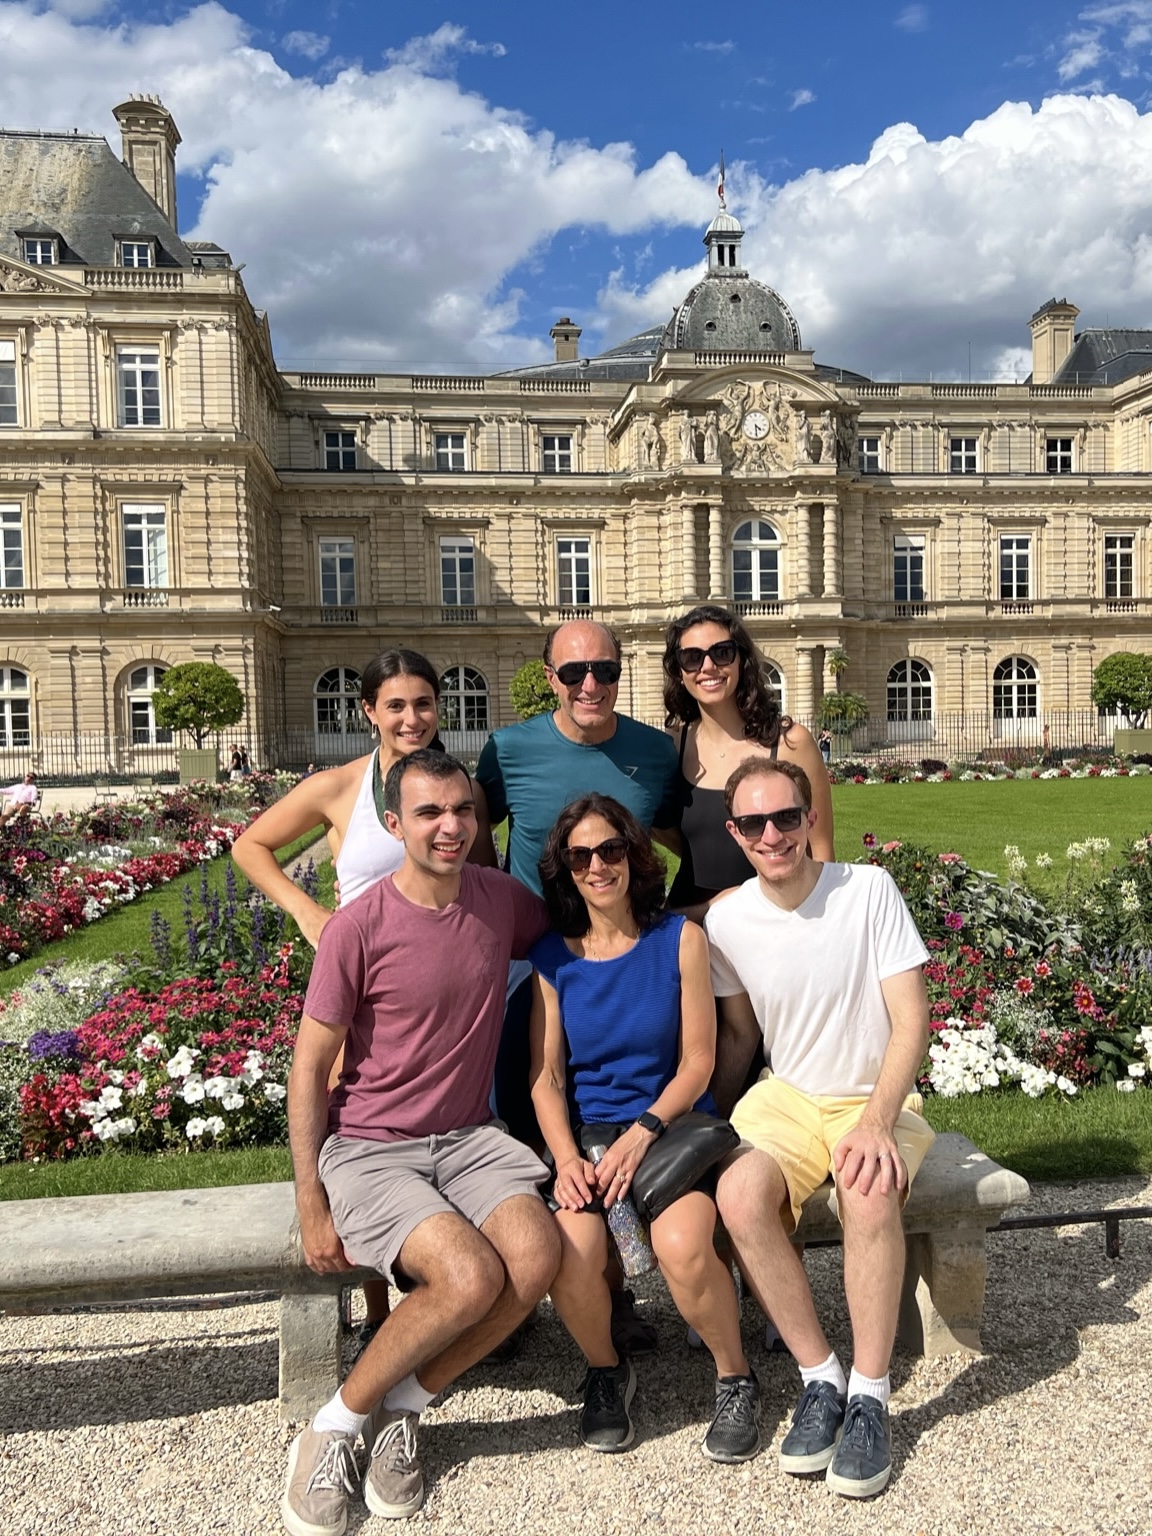 A group of six people posing and smiling in front of the Luxembourg Palace in Paris on a sunny day, clearly enjoying their employee vacation benefits. Three people stand in the back while the other three sit on a bench in front. Flower gardens and the historic building are visible in the background.